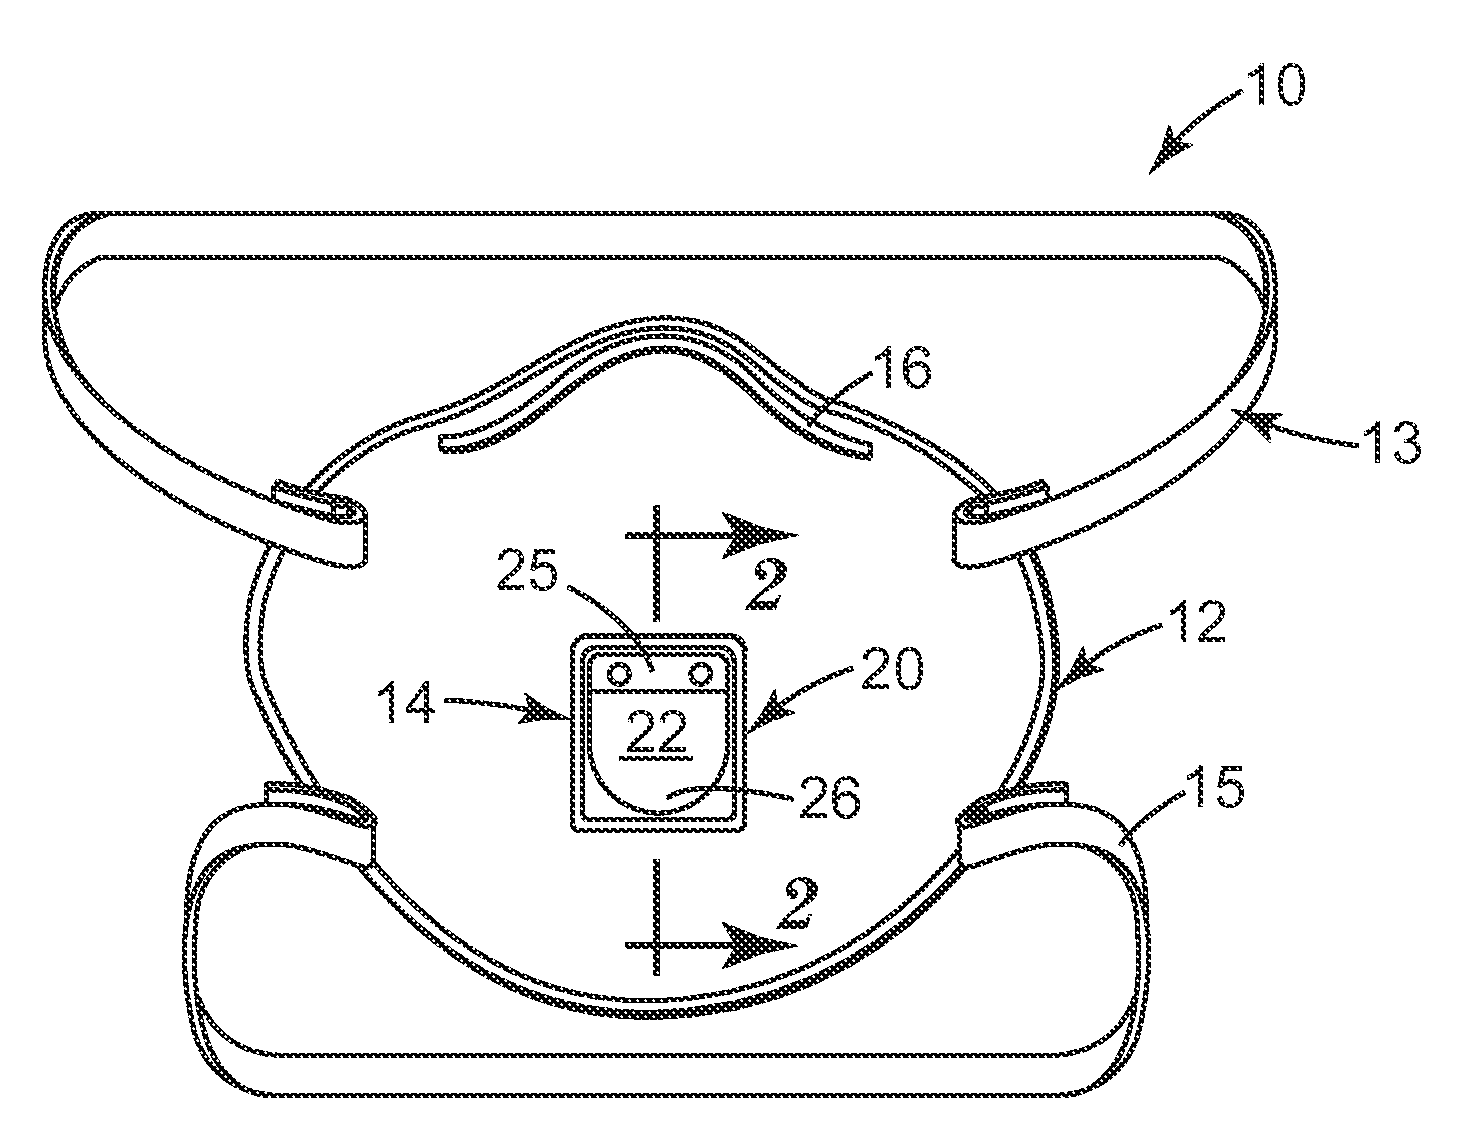 Respirator having valve with an ablated flap